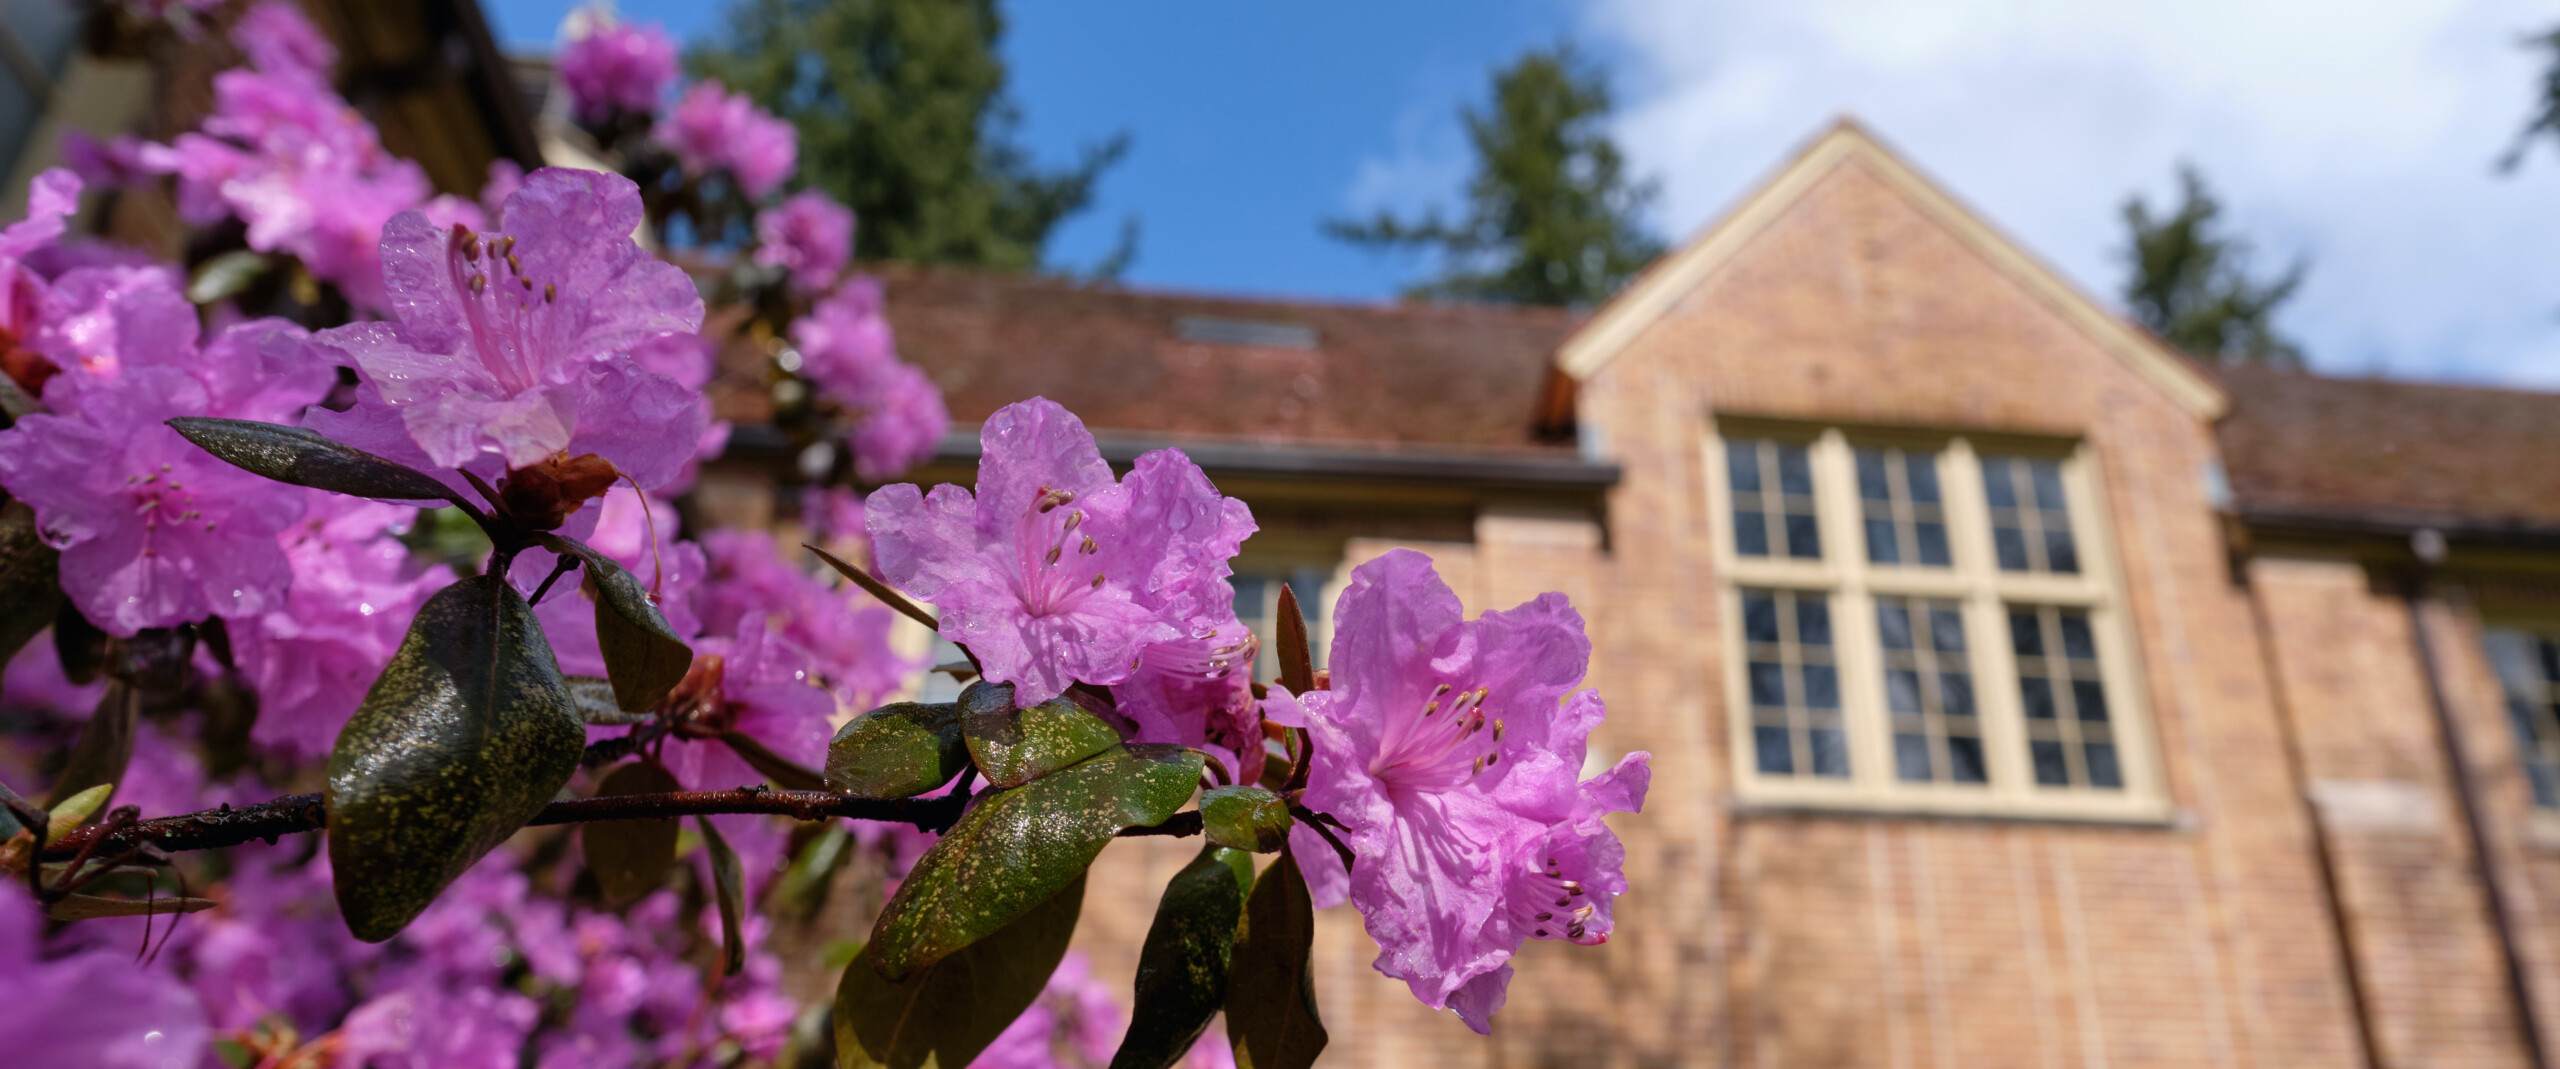 Purple Rhododendron flowers blooming in front of a brick academic building.